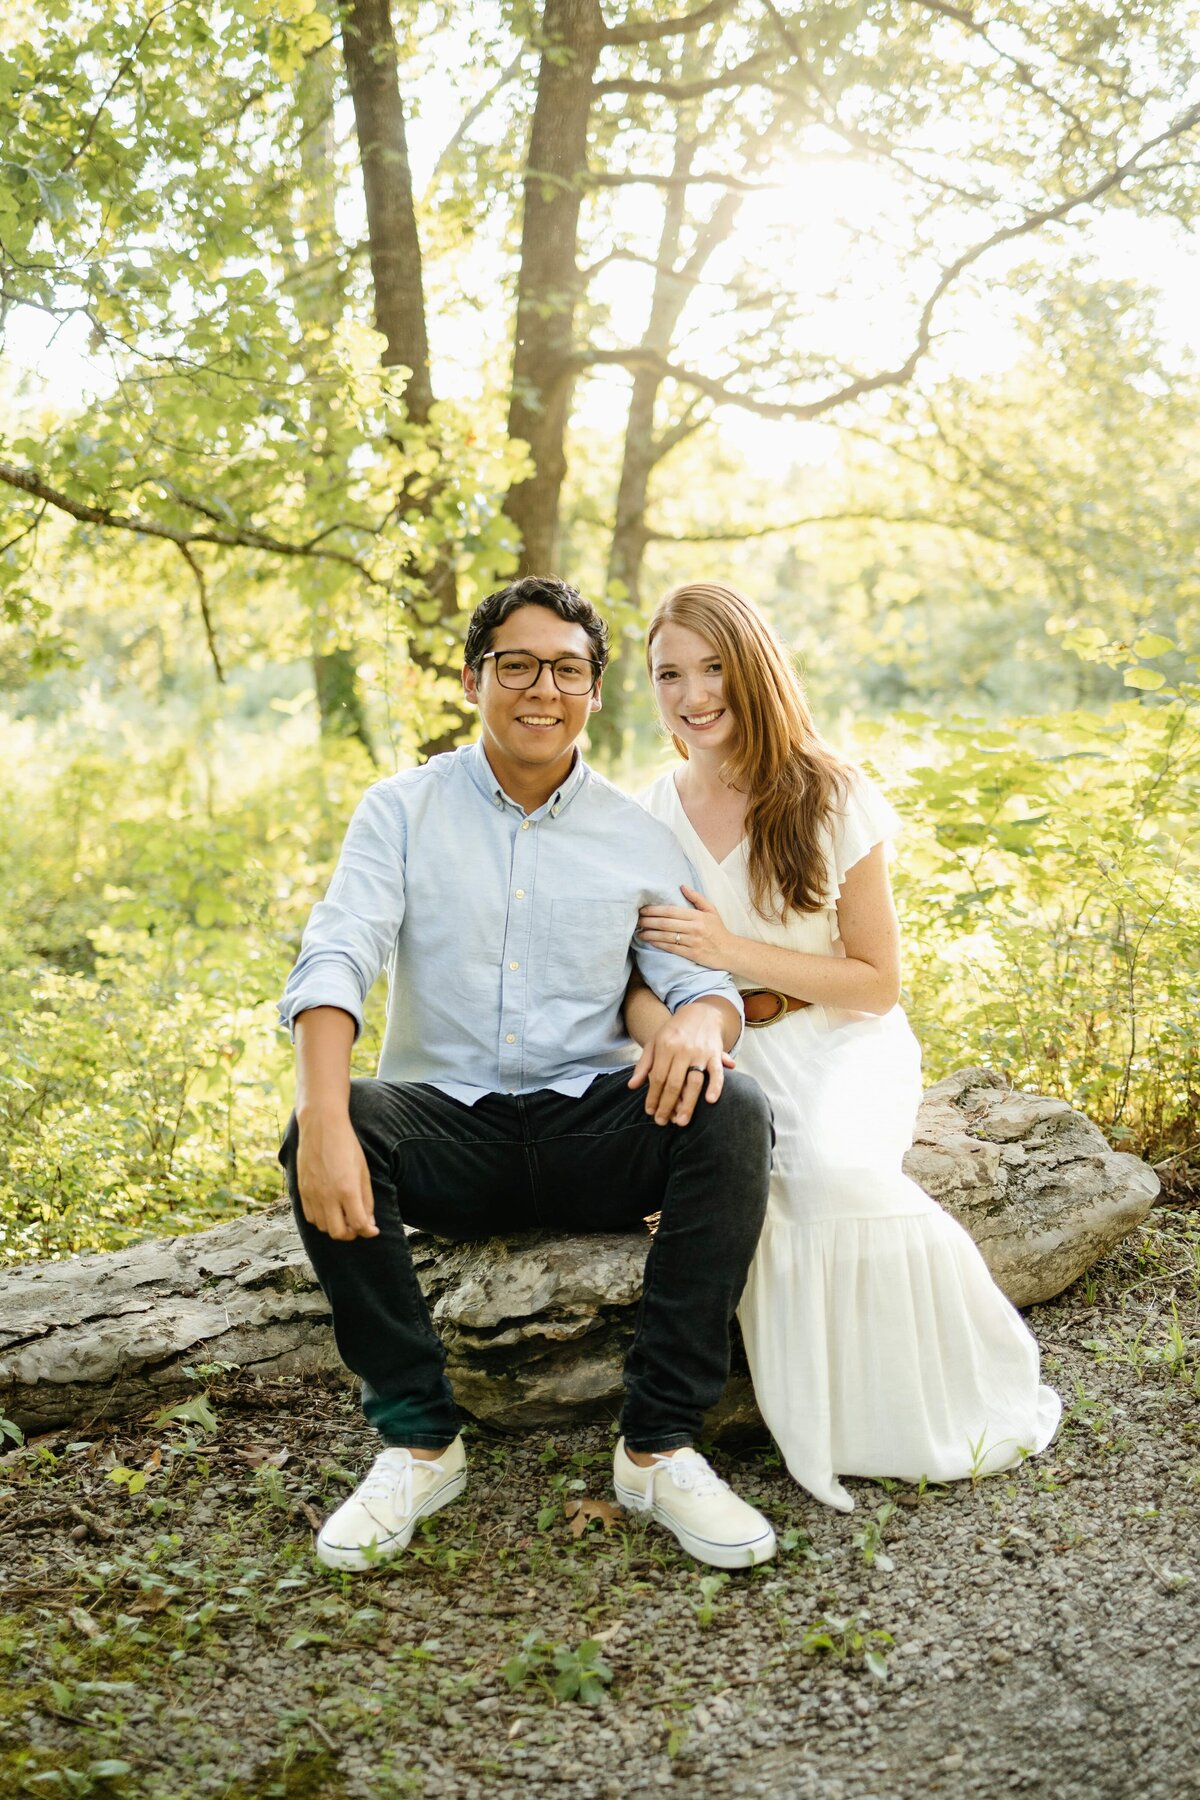 Outdoor Engagement Session in Rural Tennessee